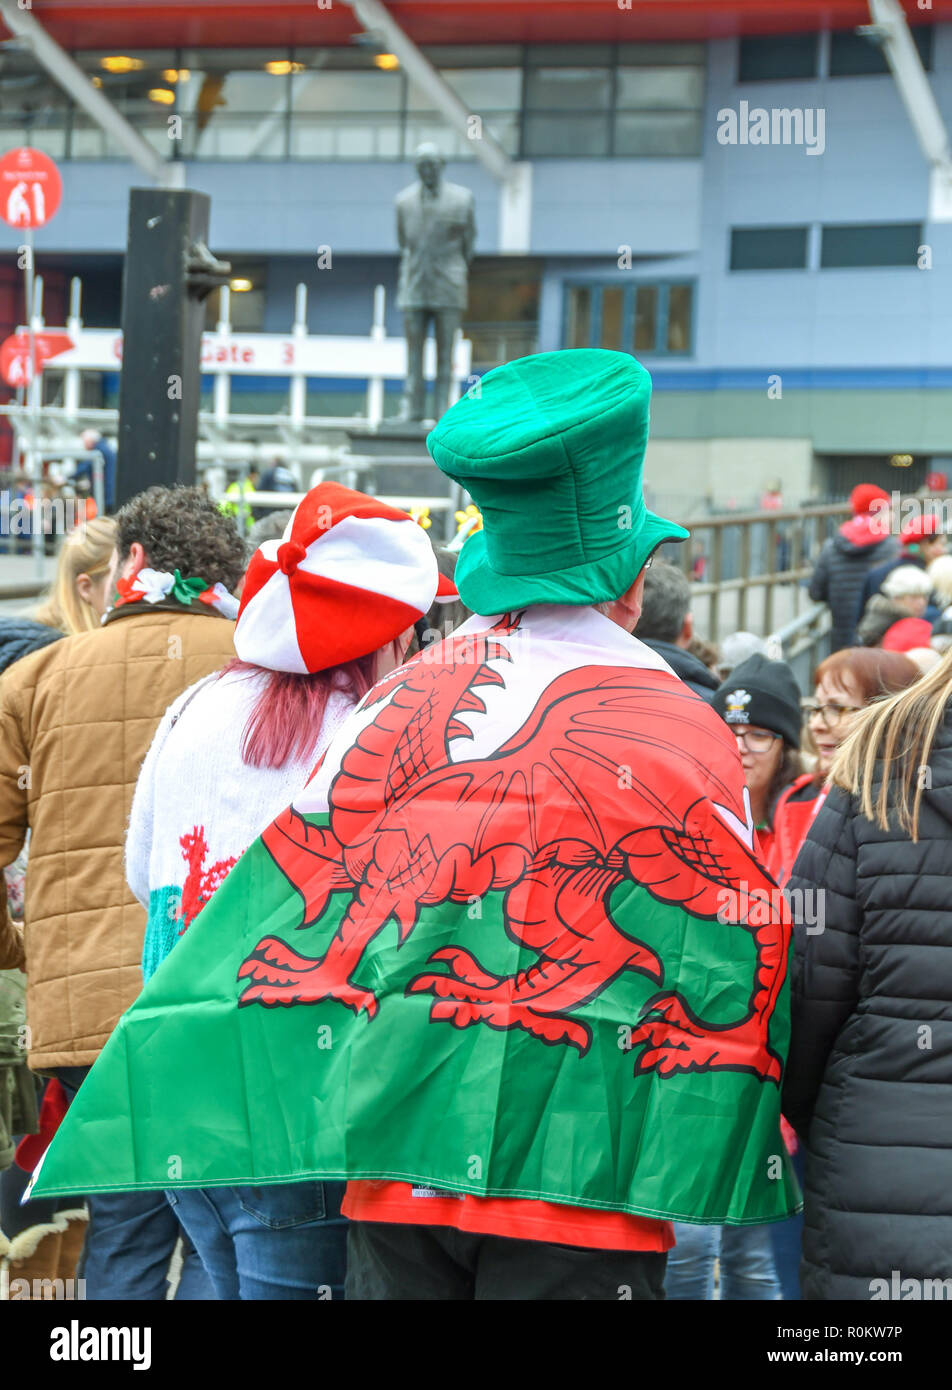 CARDIFF, WALES - NOVEMBER 2018: Person with a green hat and a Welsh flag, the 'Red Dragon', draped over his shoulders in Cardiff city centre on the da Stock Photo